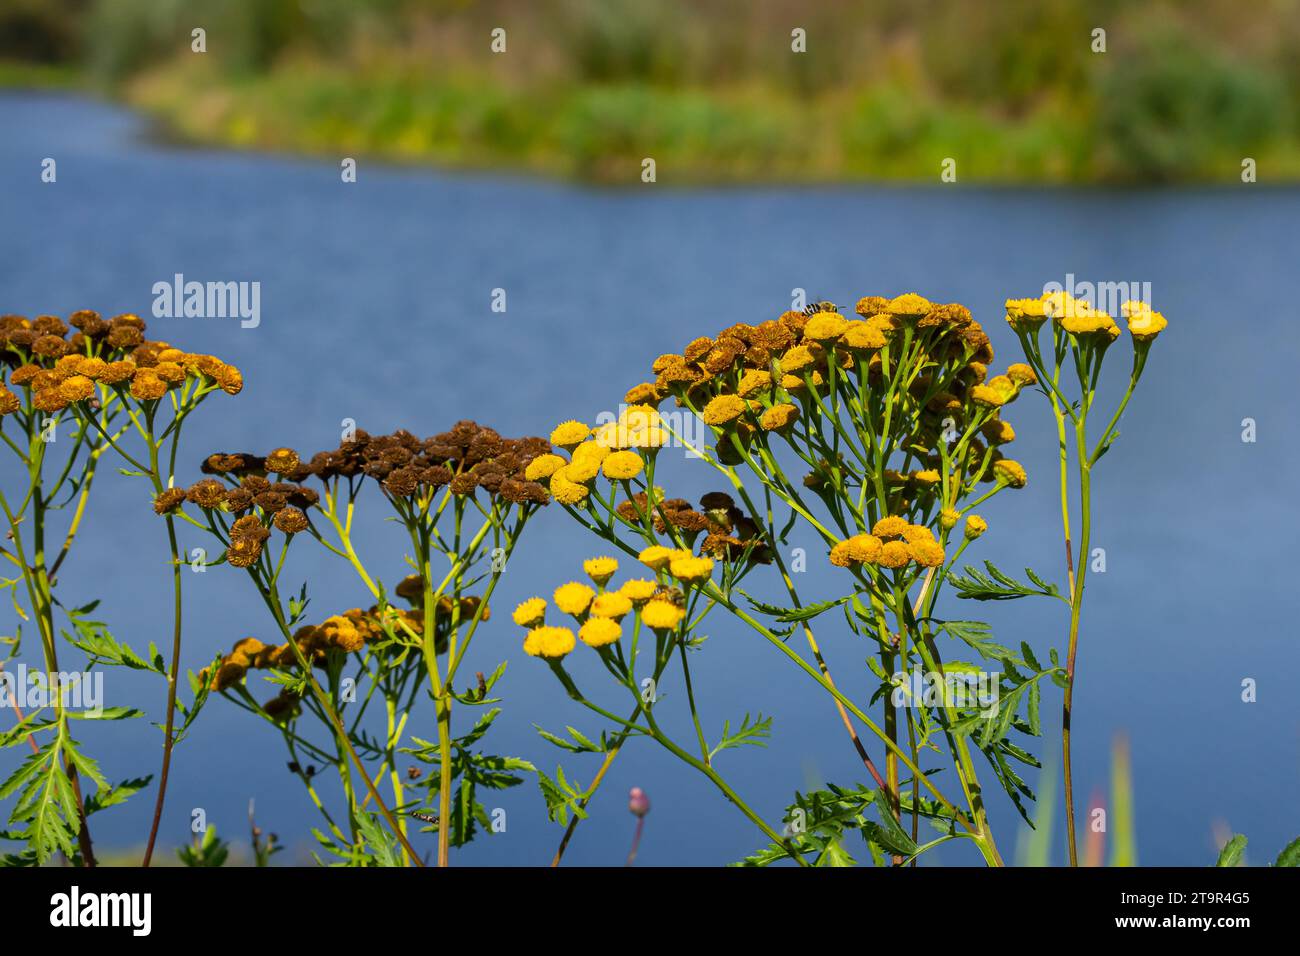 Tansy is a perennial herbaceous flowering plant used in folk medicine. Stock Photo